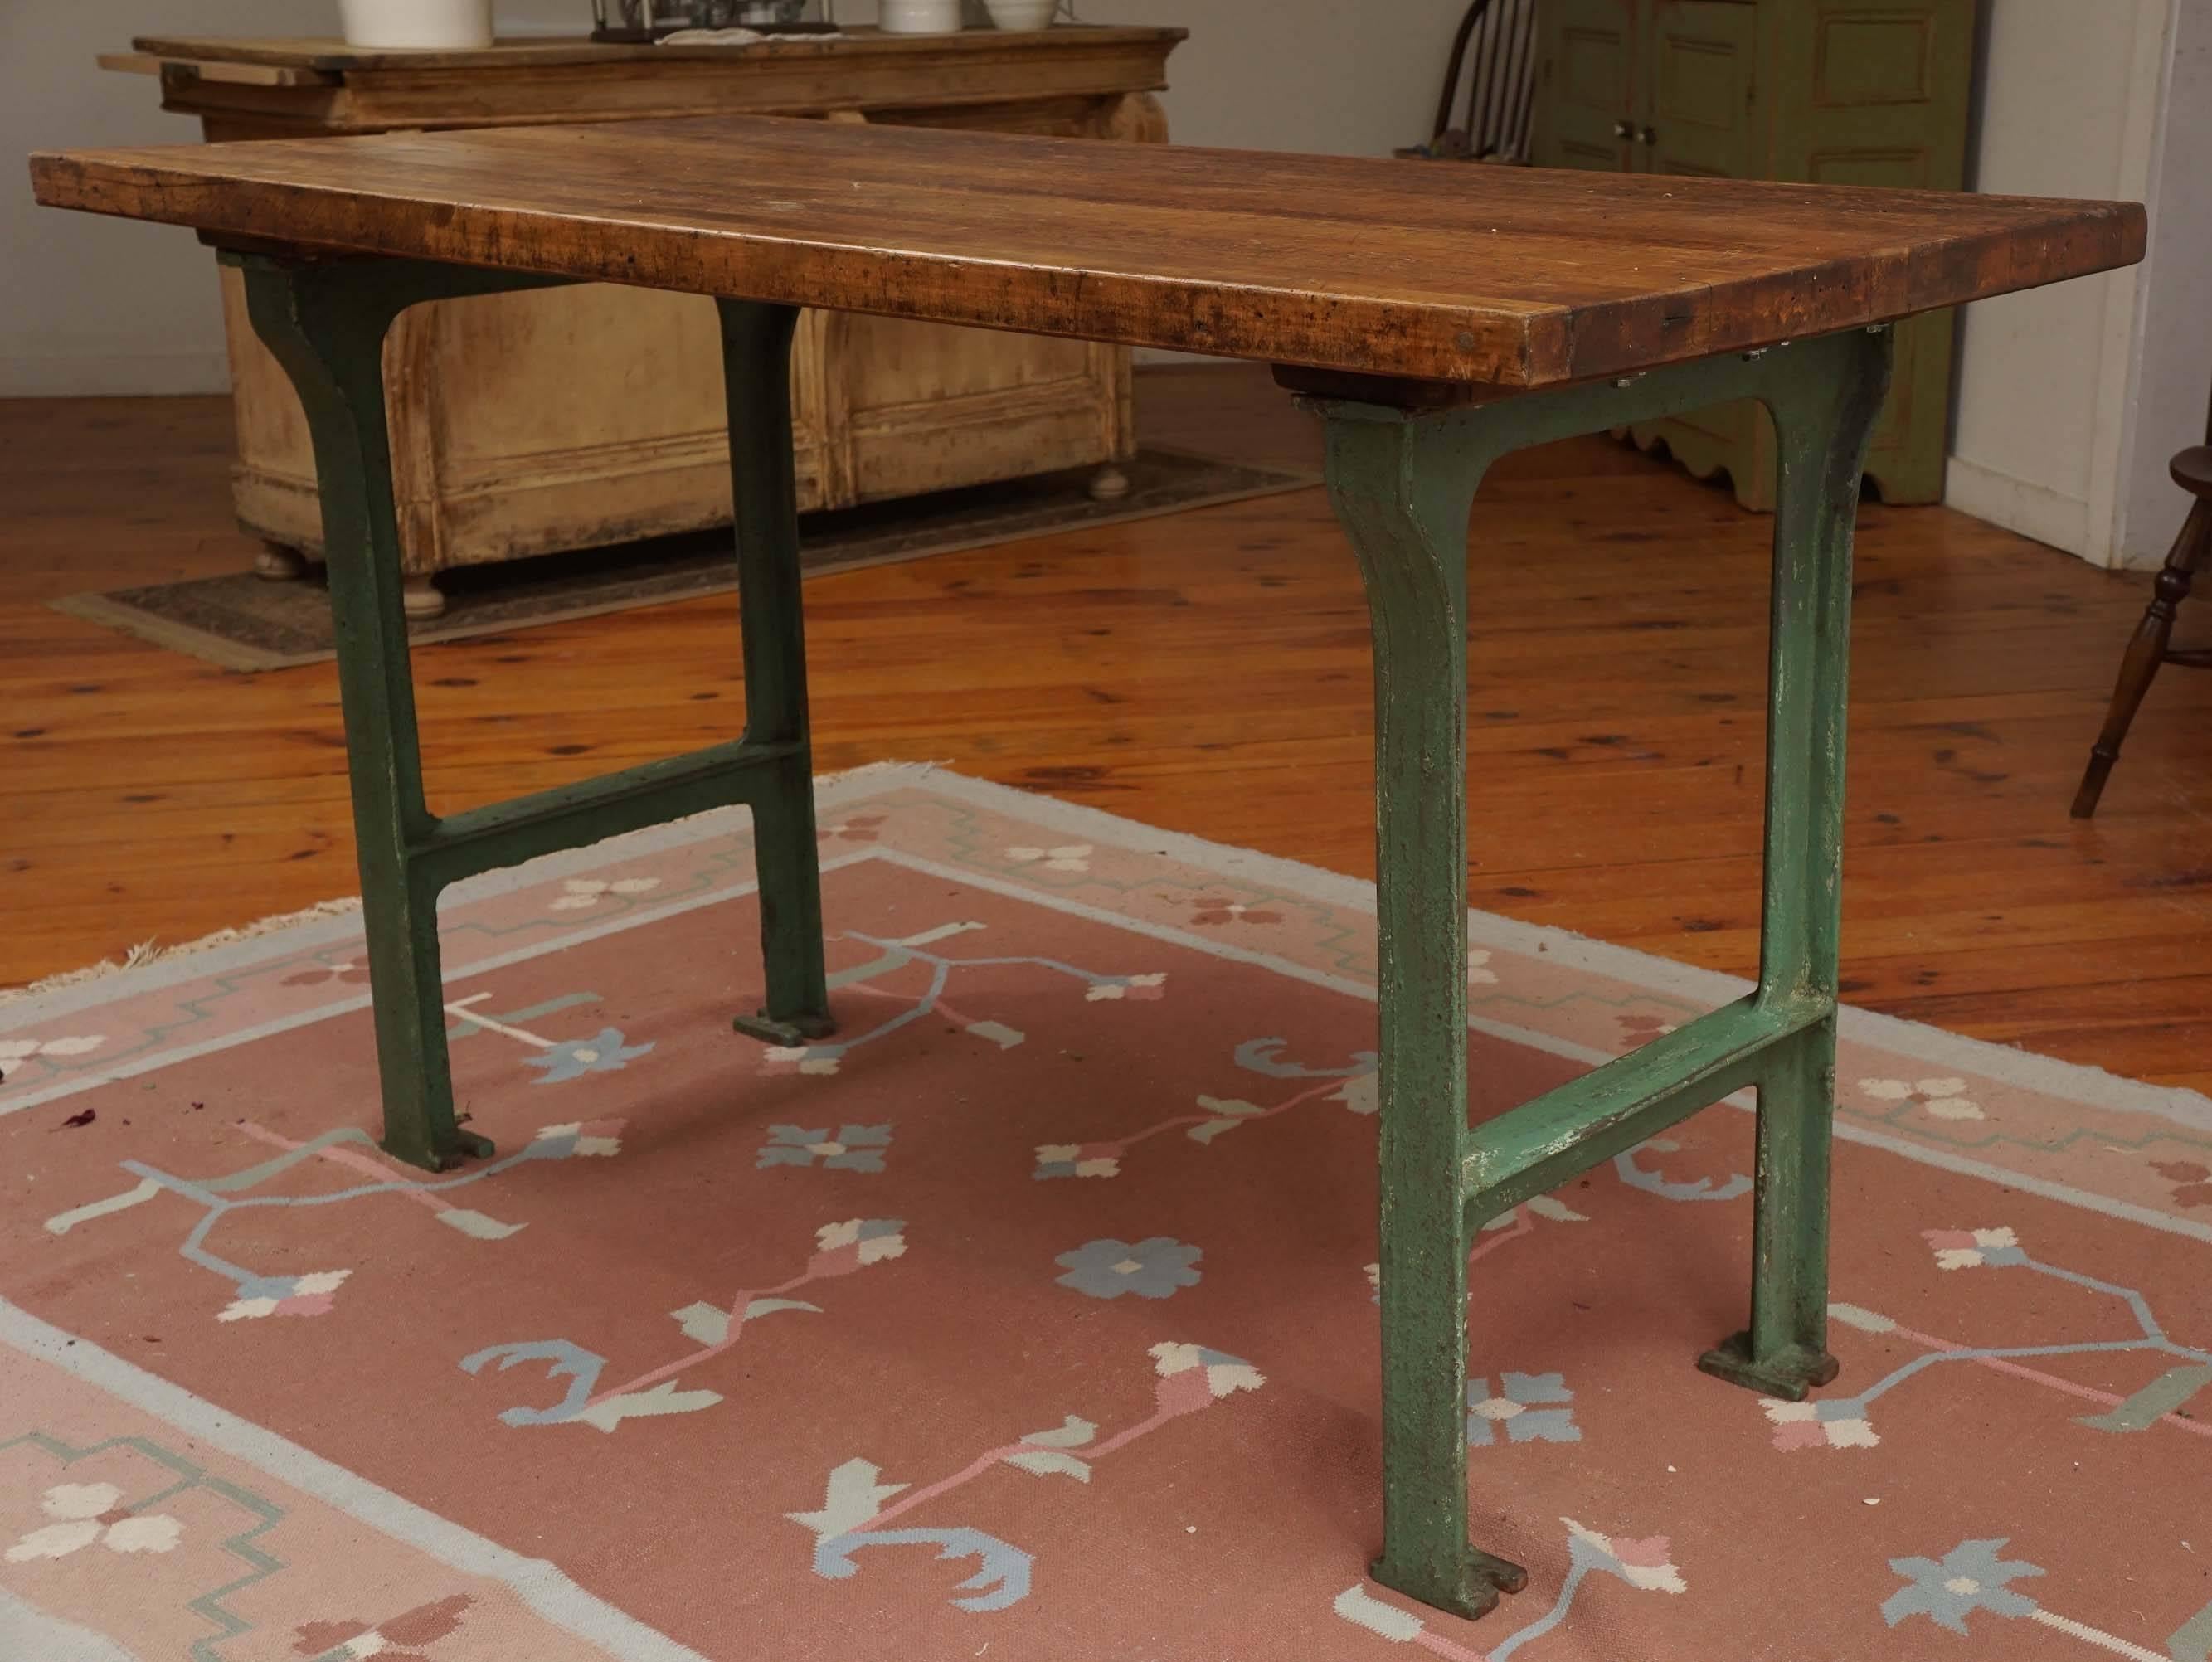 This maple top was originally a butcher block and wound up in a school in the mid west and made into a work table. This would be a perfect center island in a kitchen, with overhang on each end of the table. The base has original paint and the table